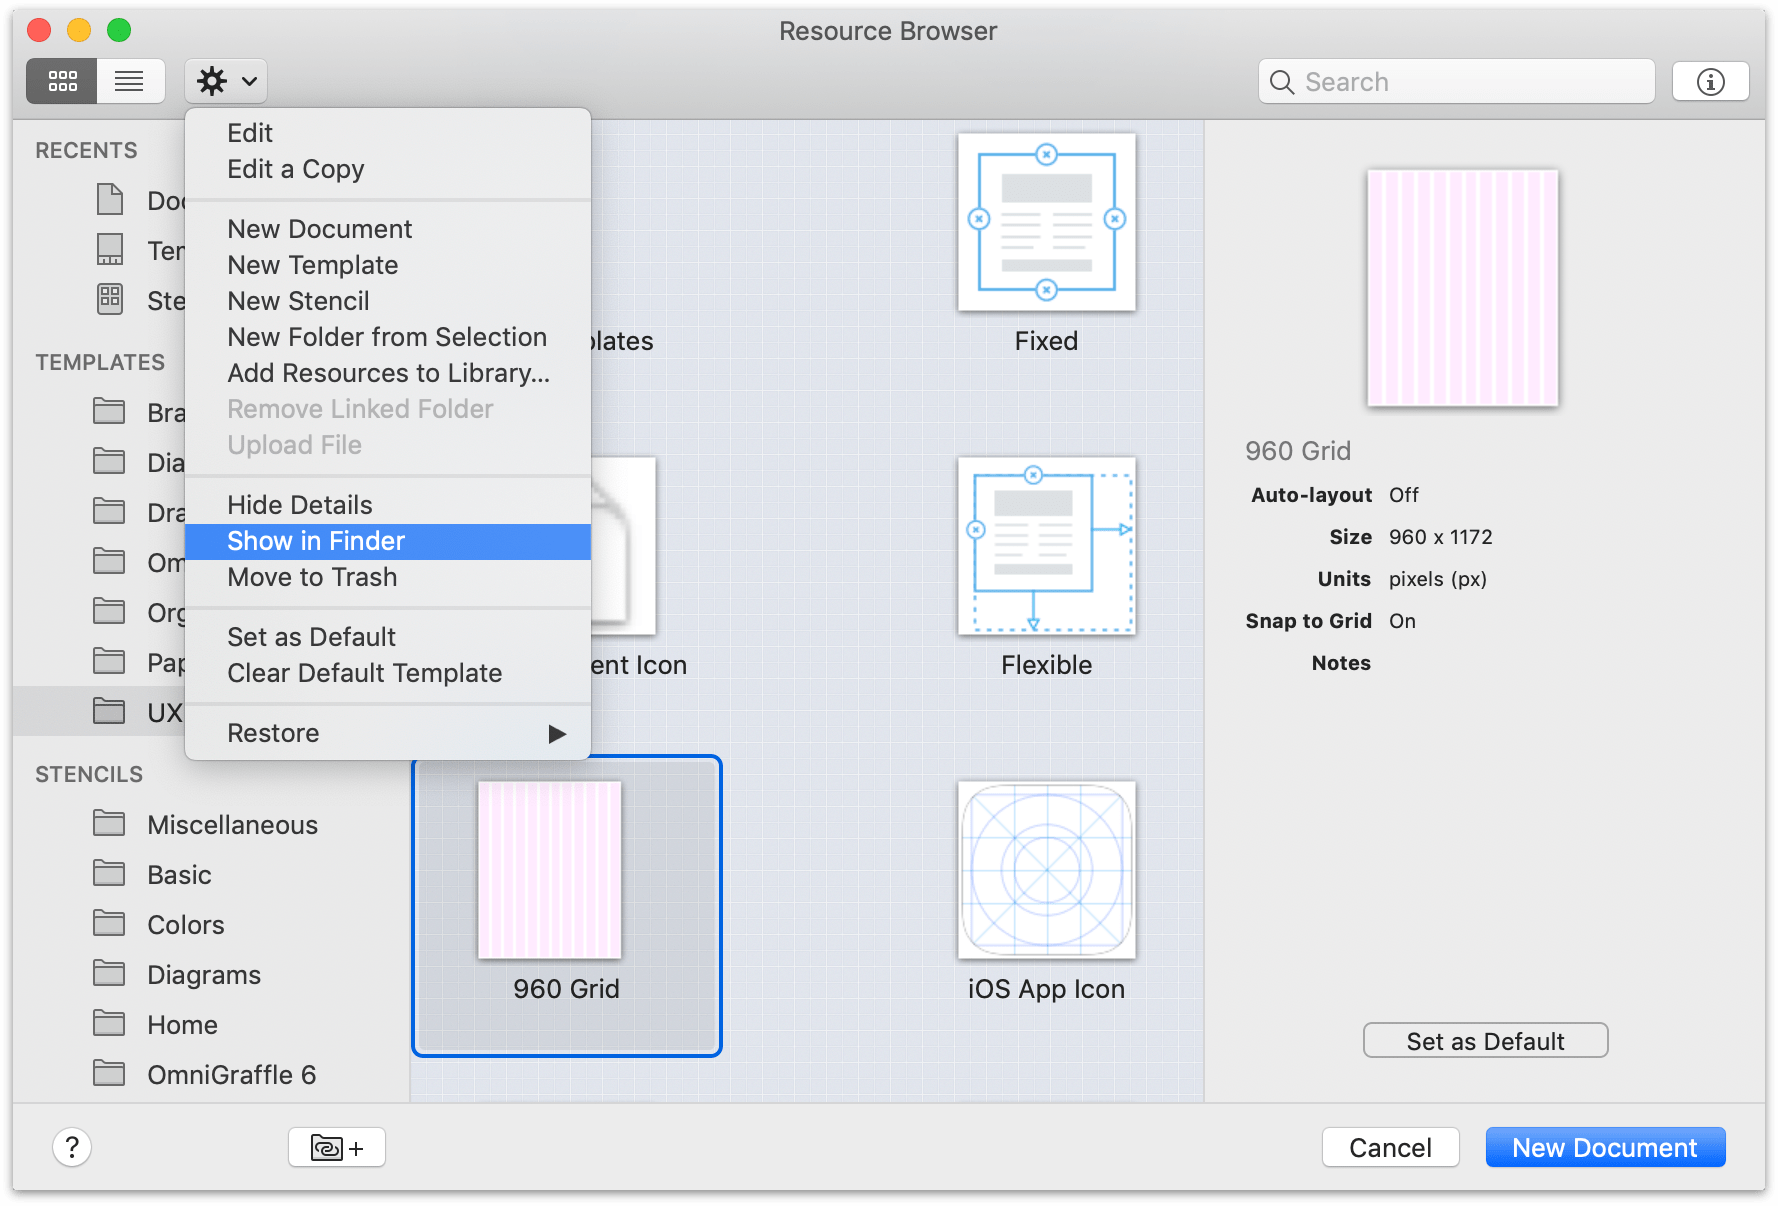 Choose Show in Finder from the gear menu of any template